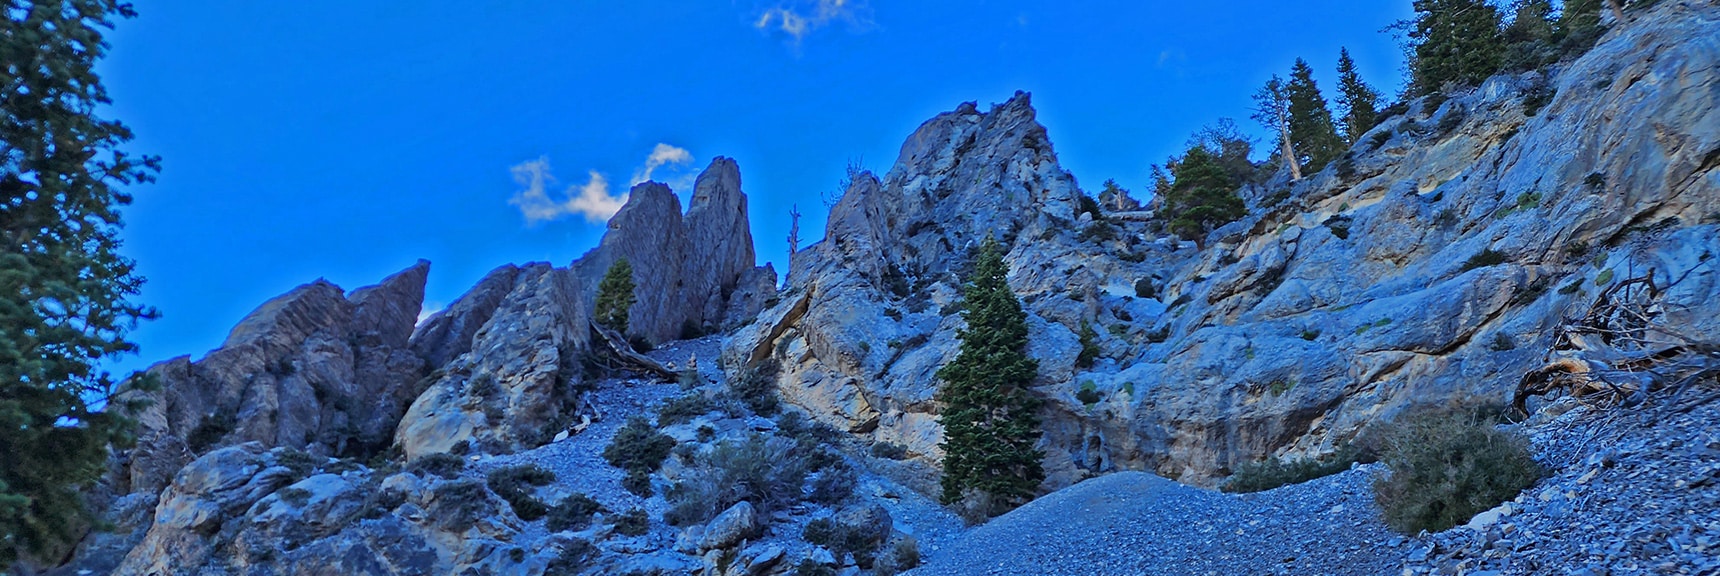 In a Bowl Surrounded by High Walls. | Mummy Mountain Head from Lee Canyon Road | Mt Charleston Wilderness | Spring Mountains, Nevada